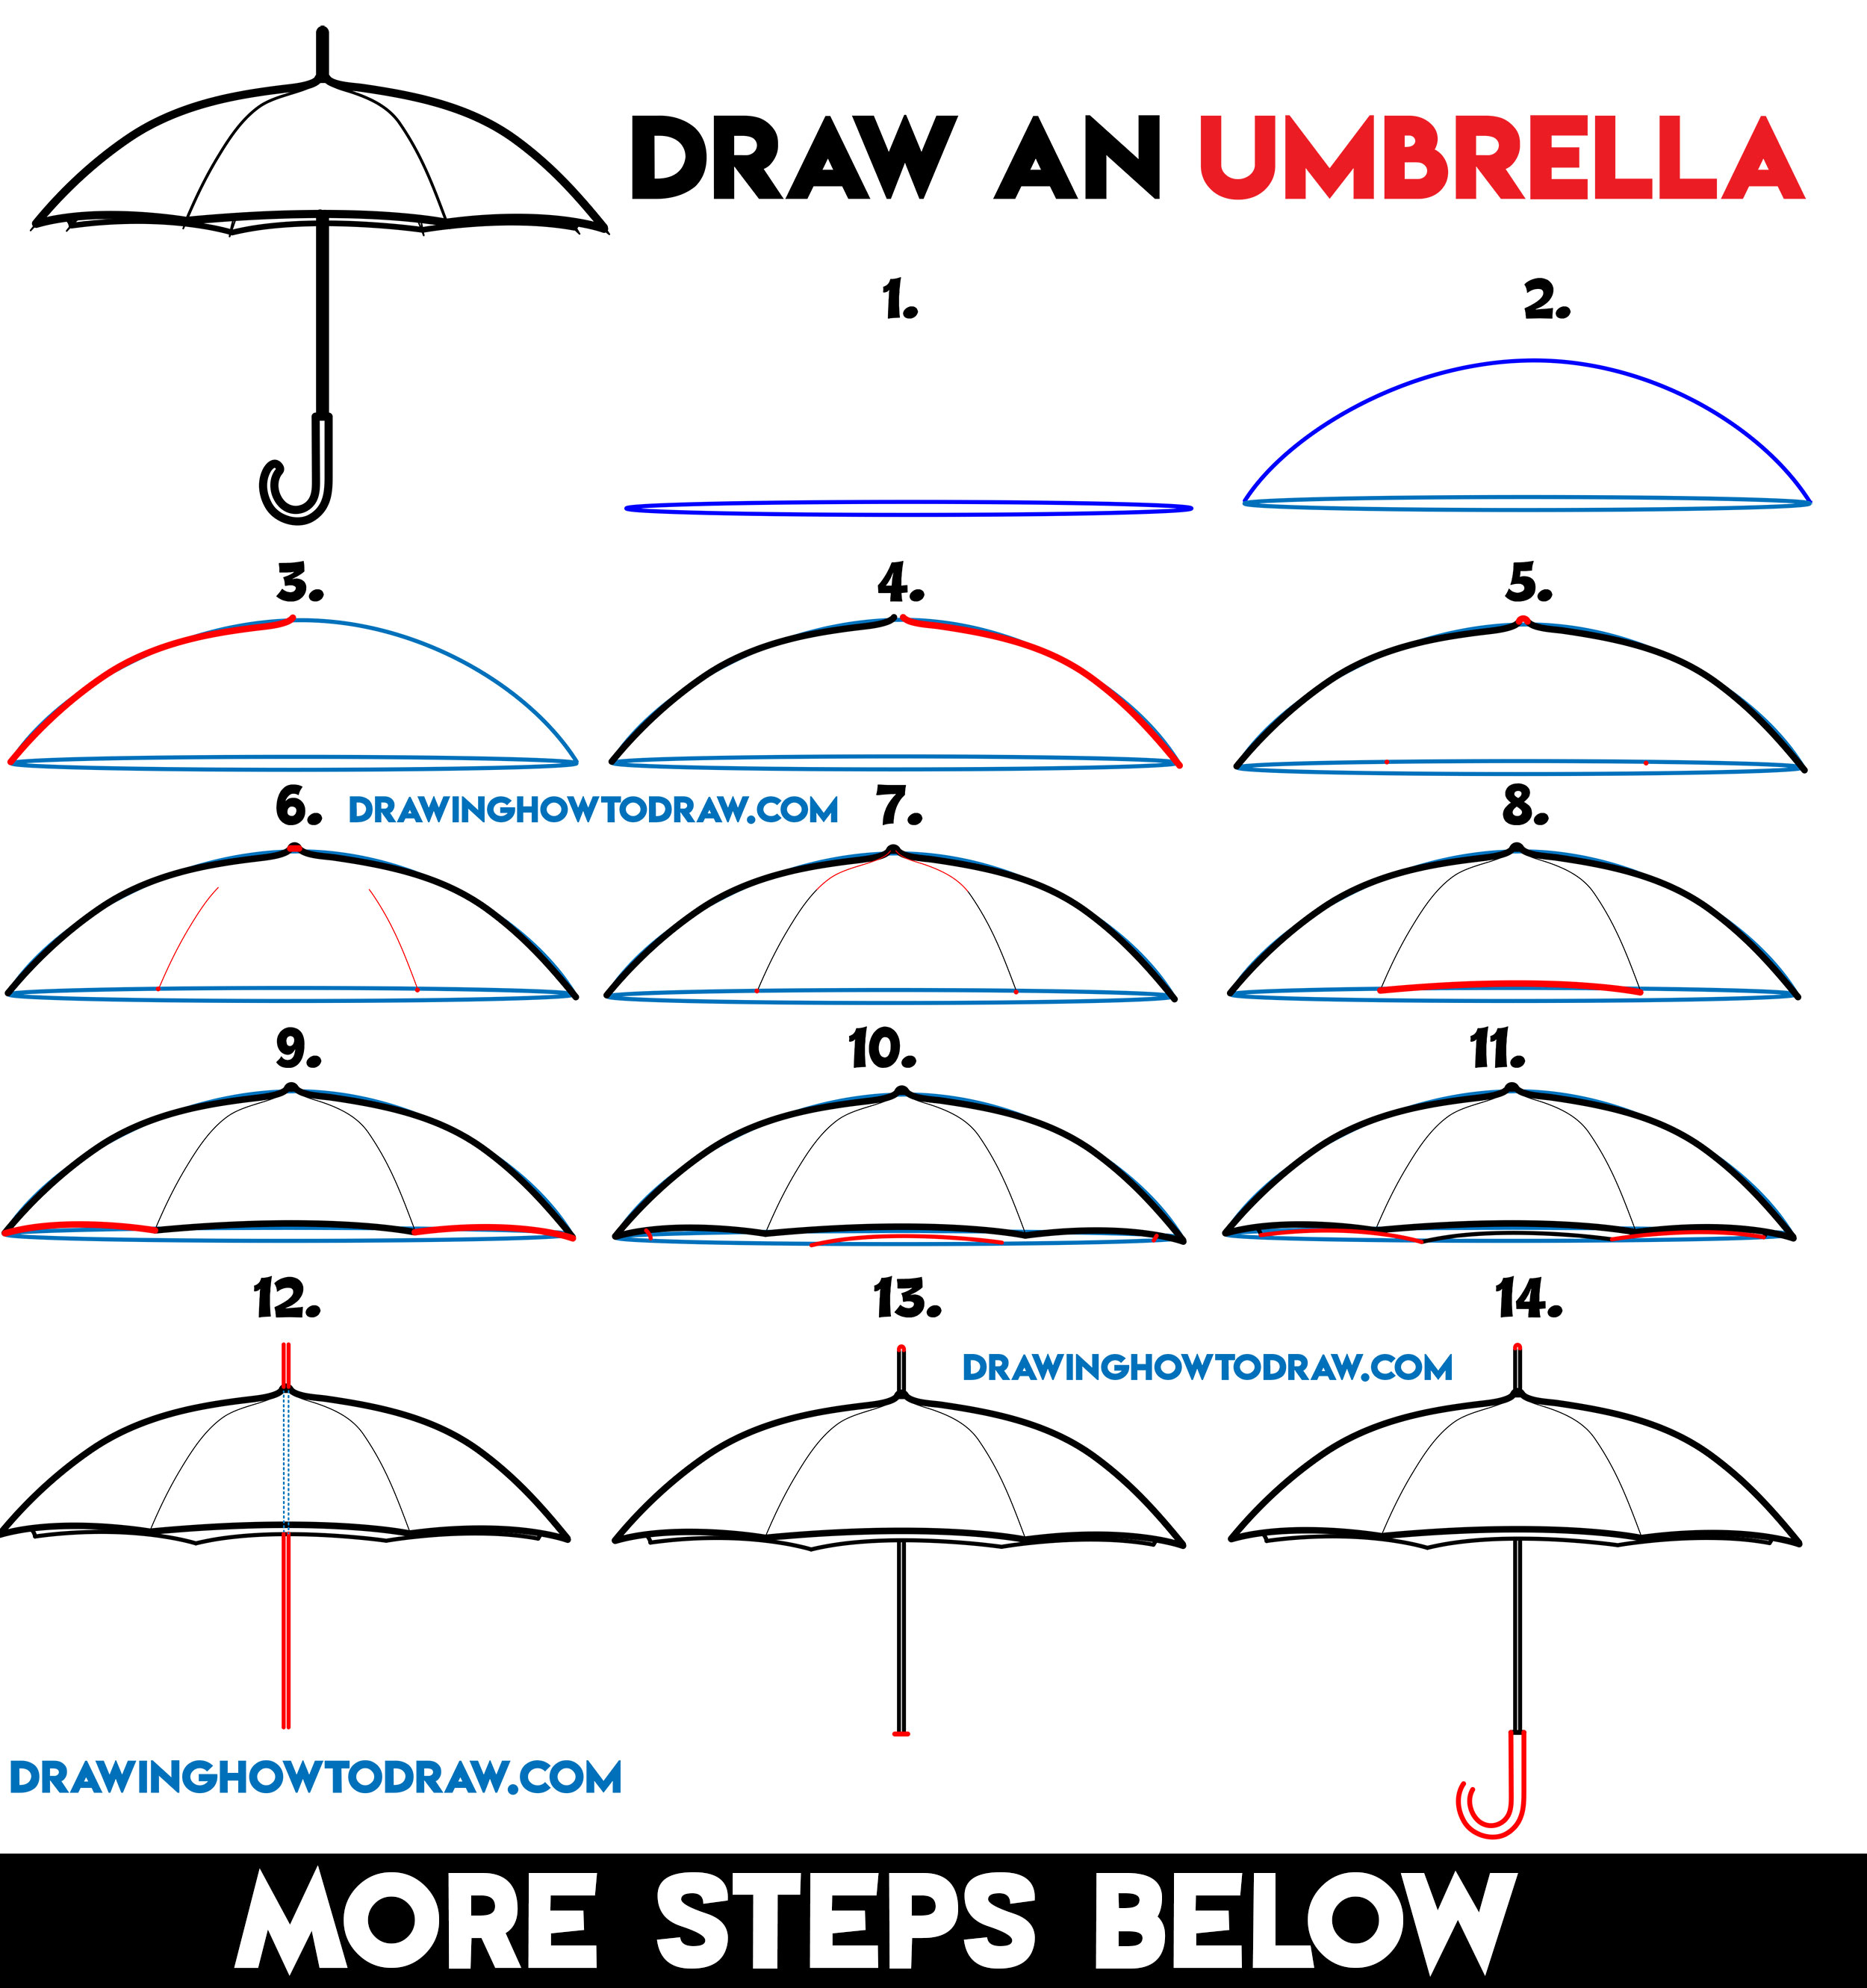 Learn How to Draw an Umbrella Easy Step by Step Drawing Tutorial for Beginners